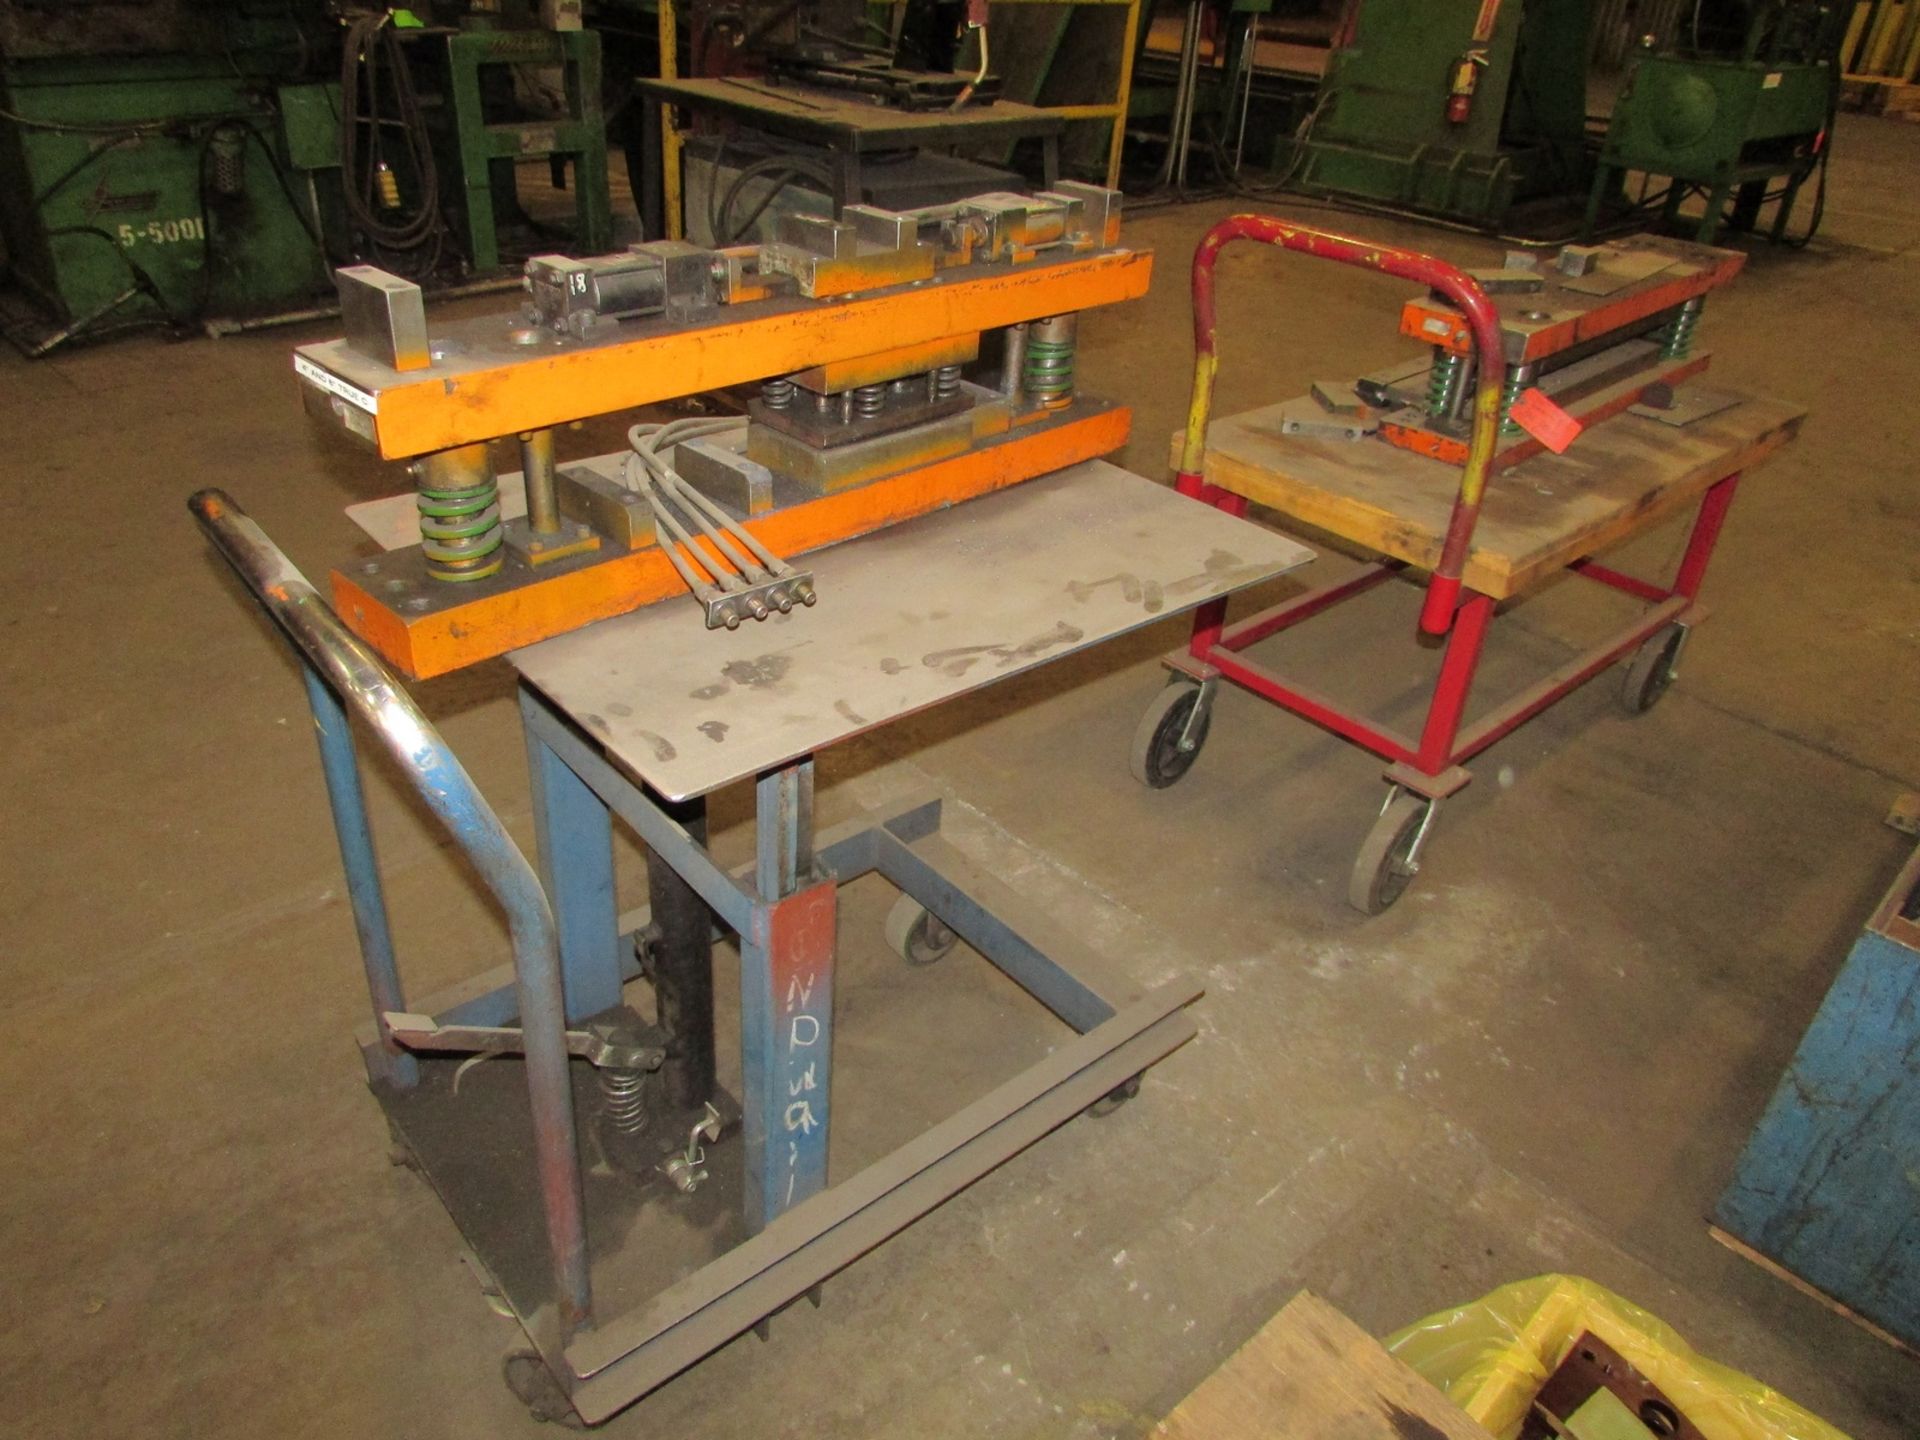 Rousselle 150 Ton Straight Side Press, Mdl: S2-150-144-36, Bed: 12' L to R, 3' F to B, 4" Stroke, - Image 13 of 13